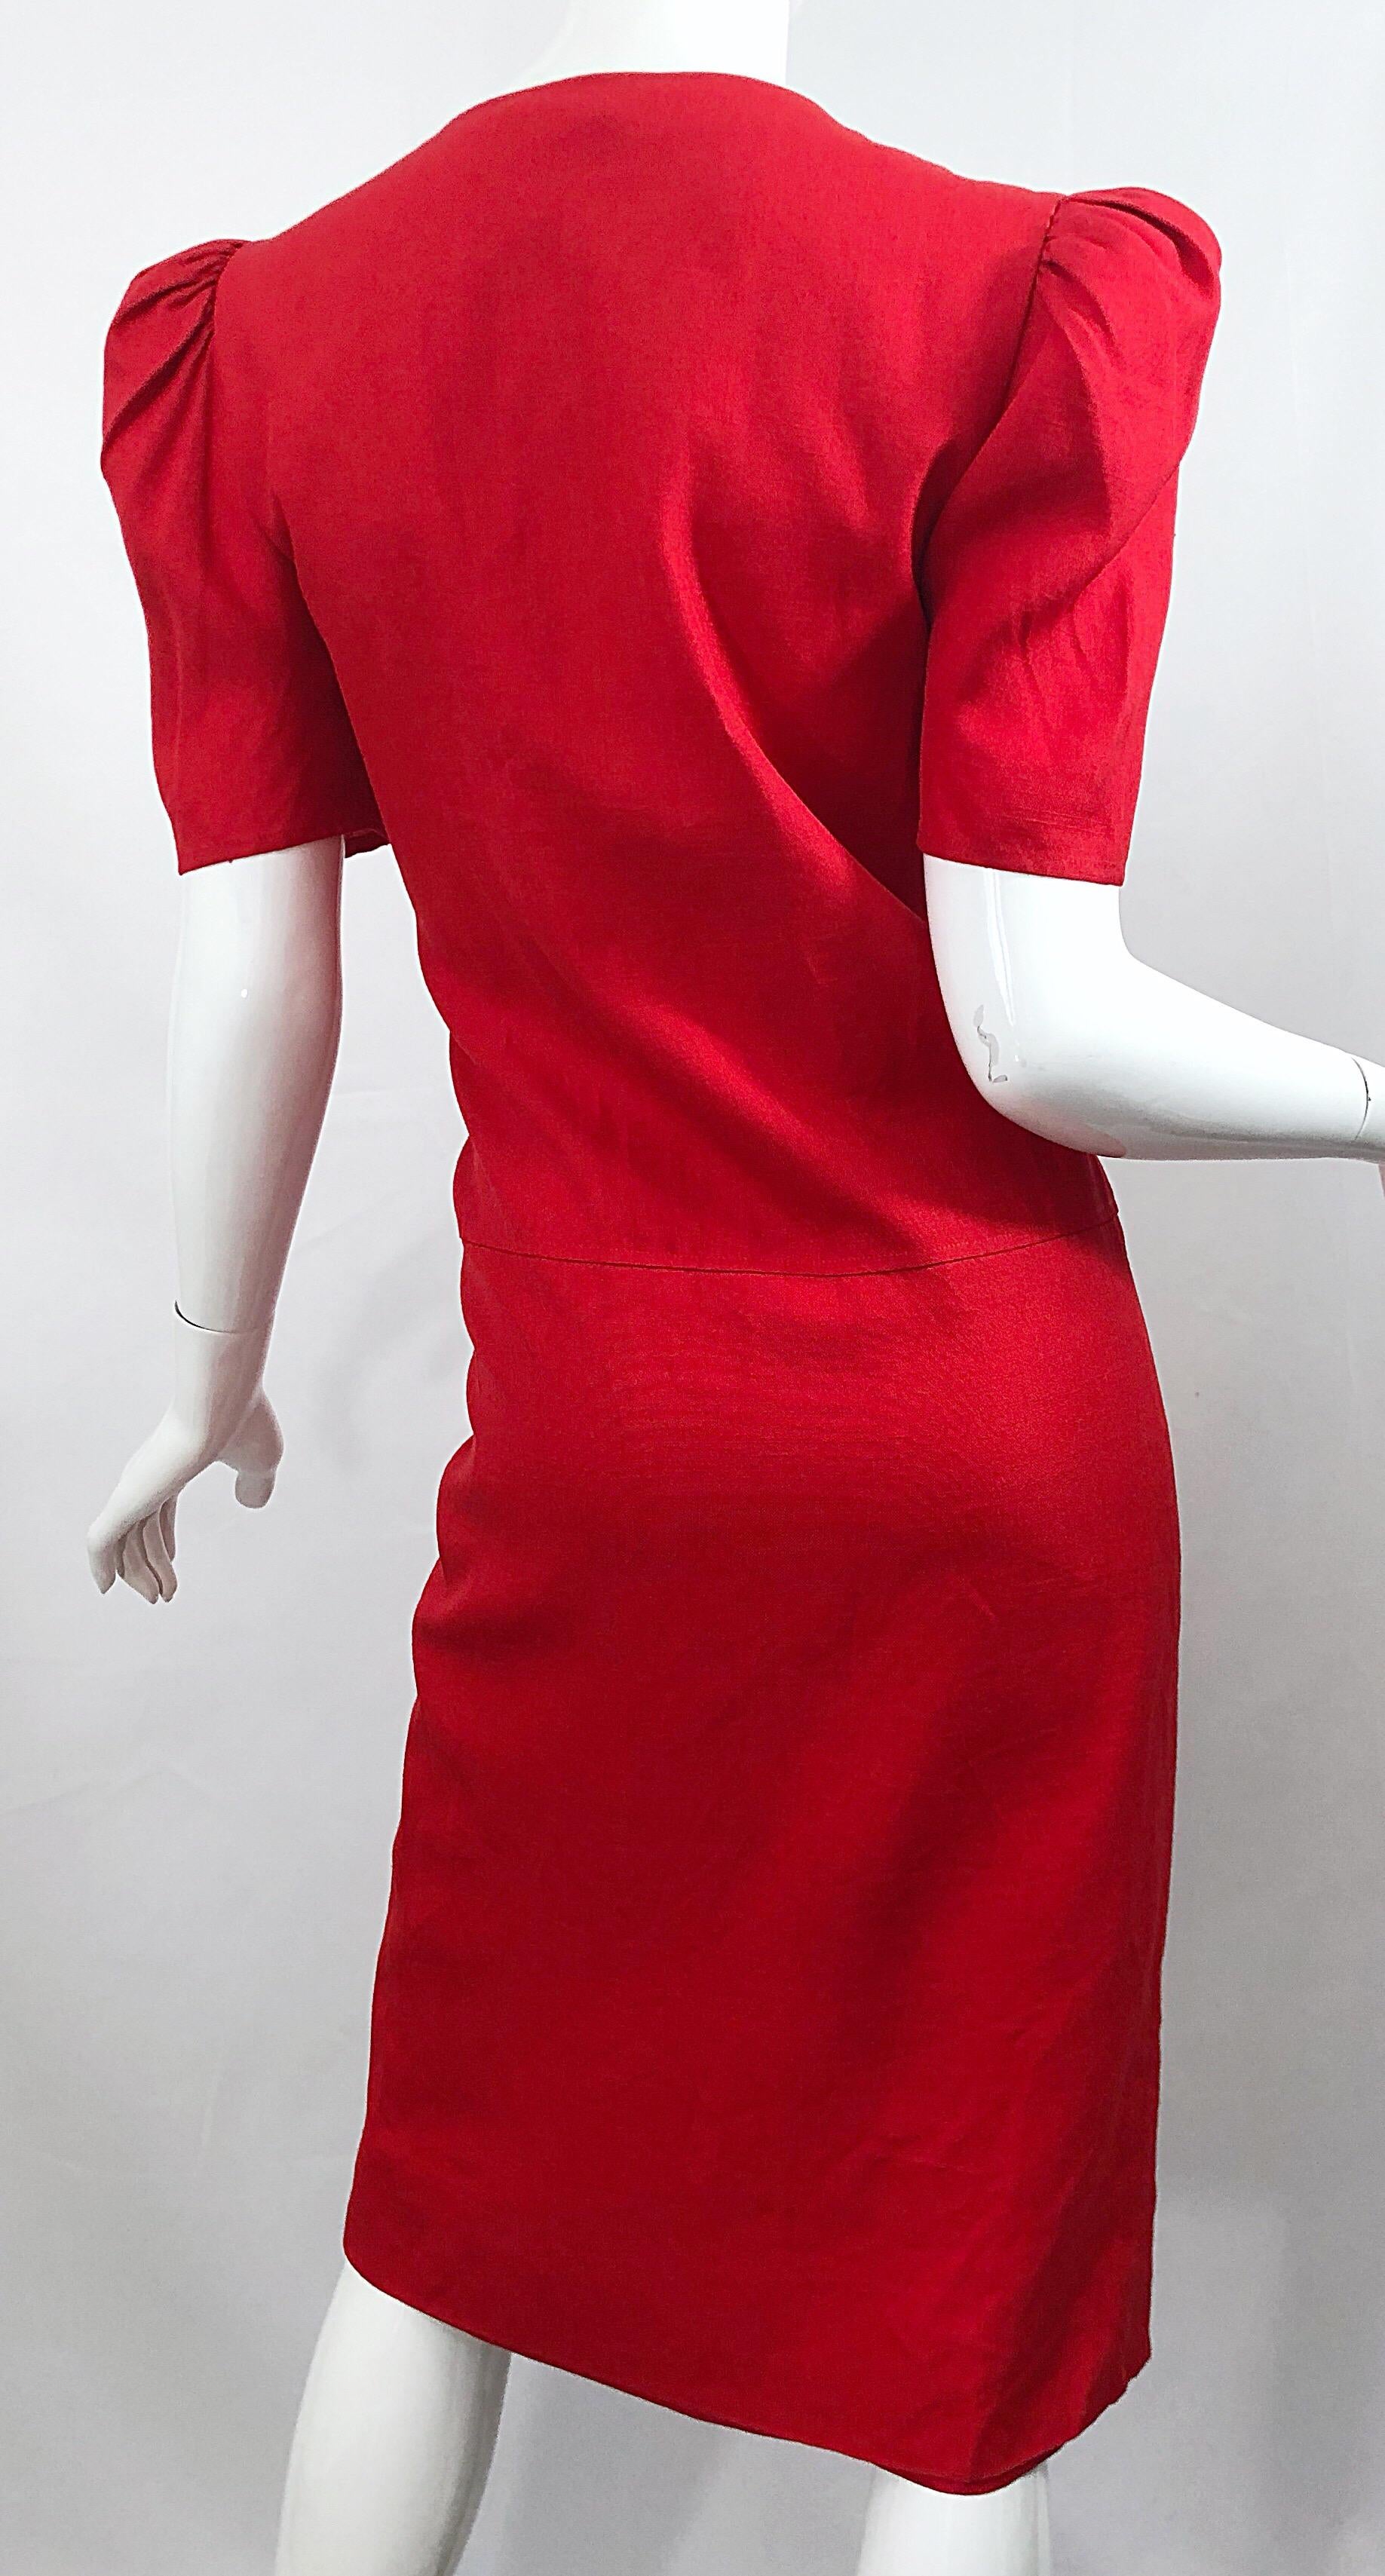 Vintage Adele Simpson I Magnin 1980s Size 10 Lipstick Red Linen Rayon 90s Dress For Sale 4